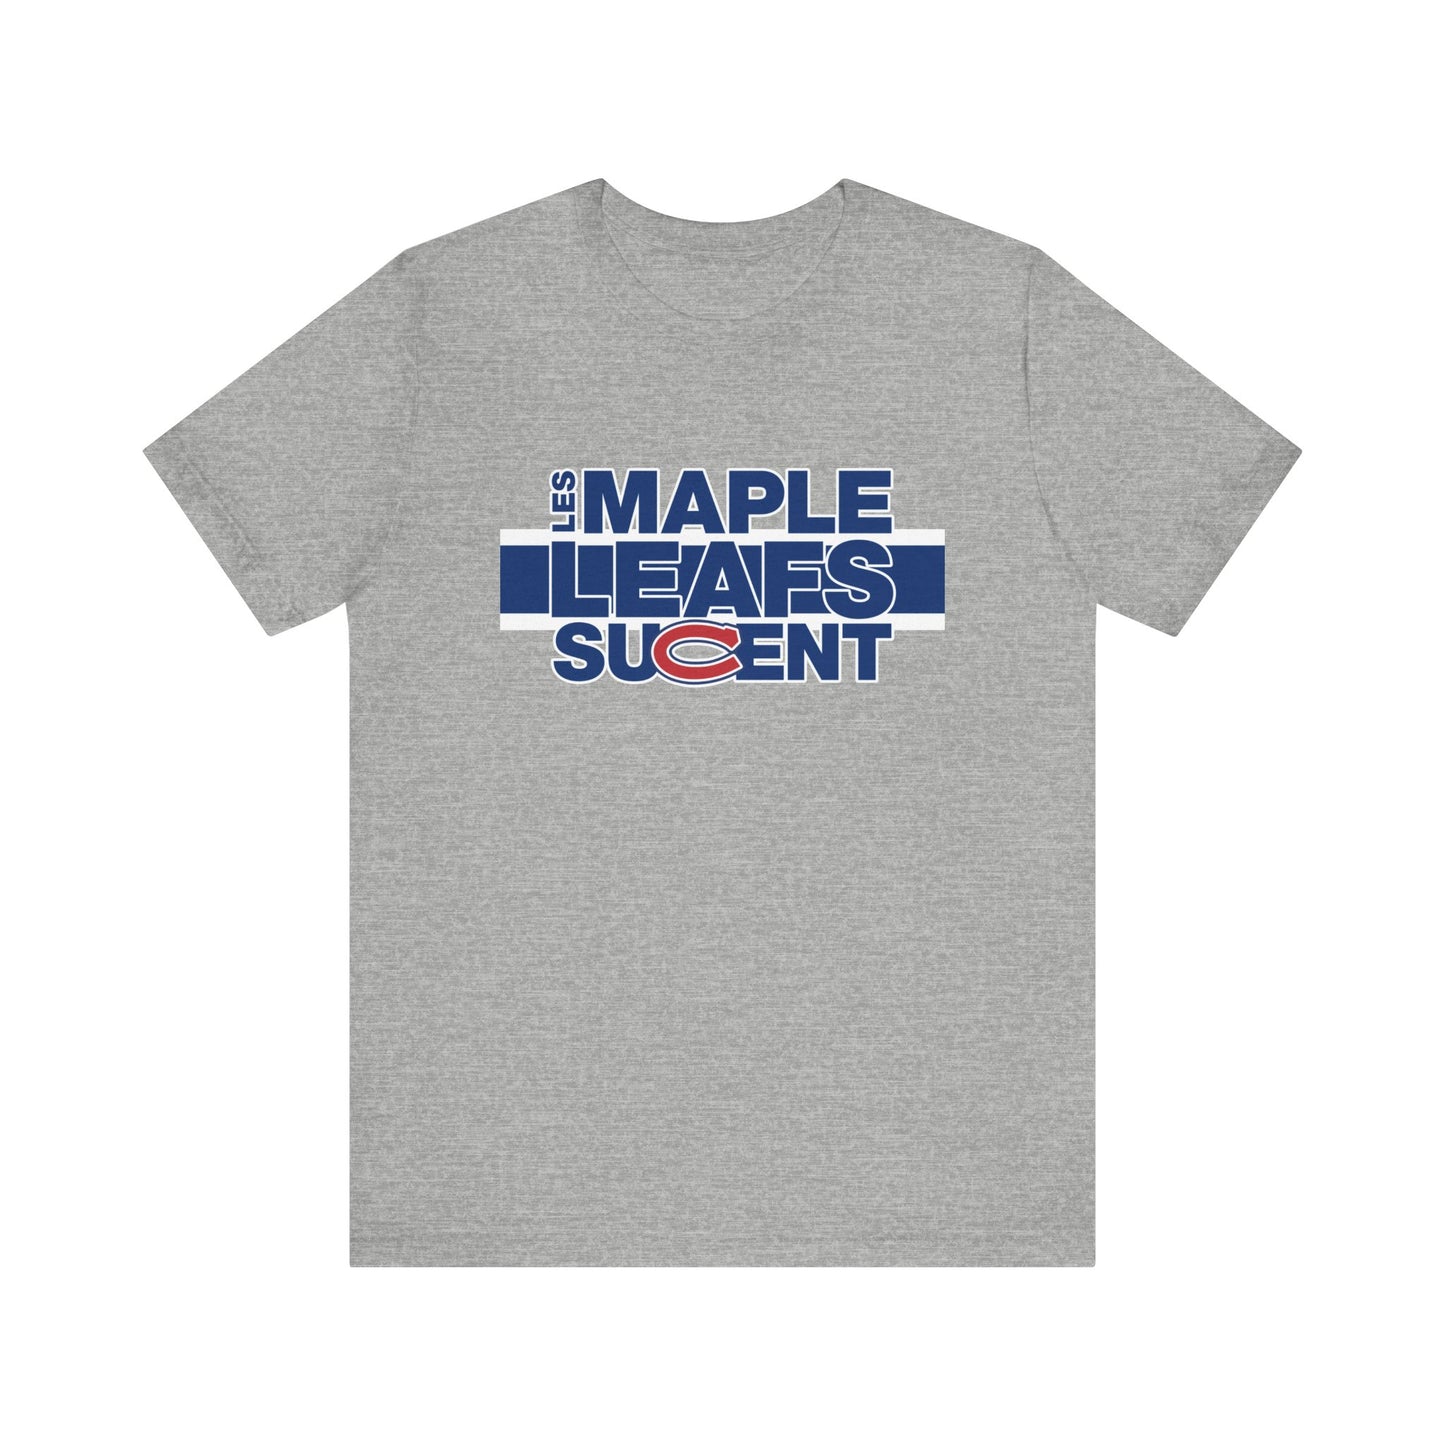 That Team of Leaves Sucent Very Mucho (for Montreal fans) - Unisex Jersey Short Sleeve Tee